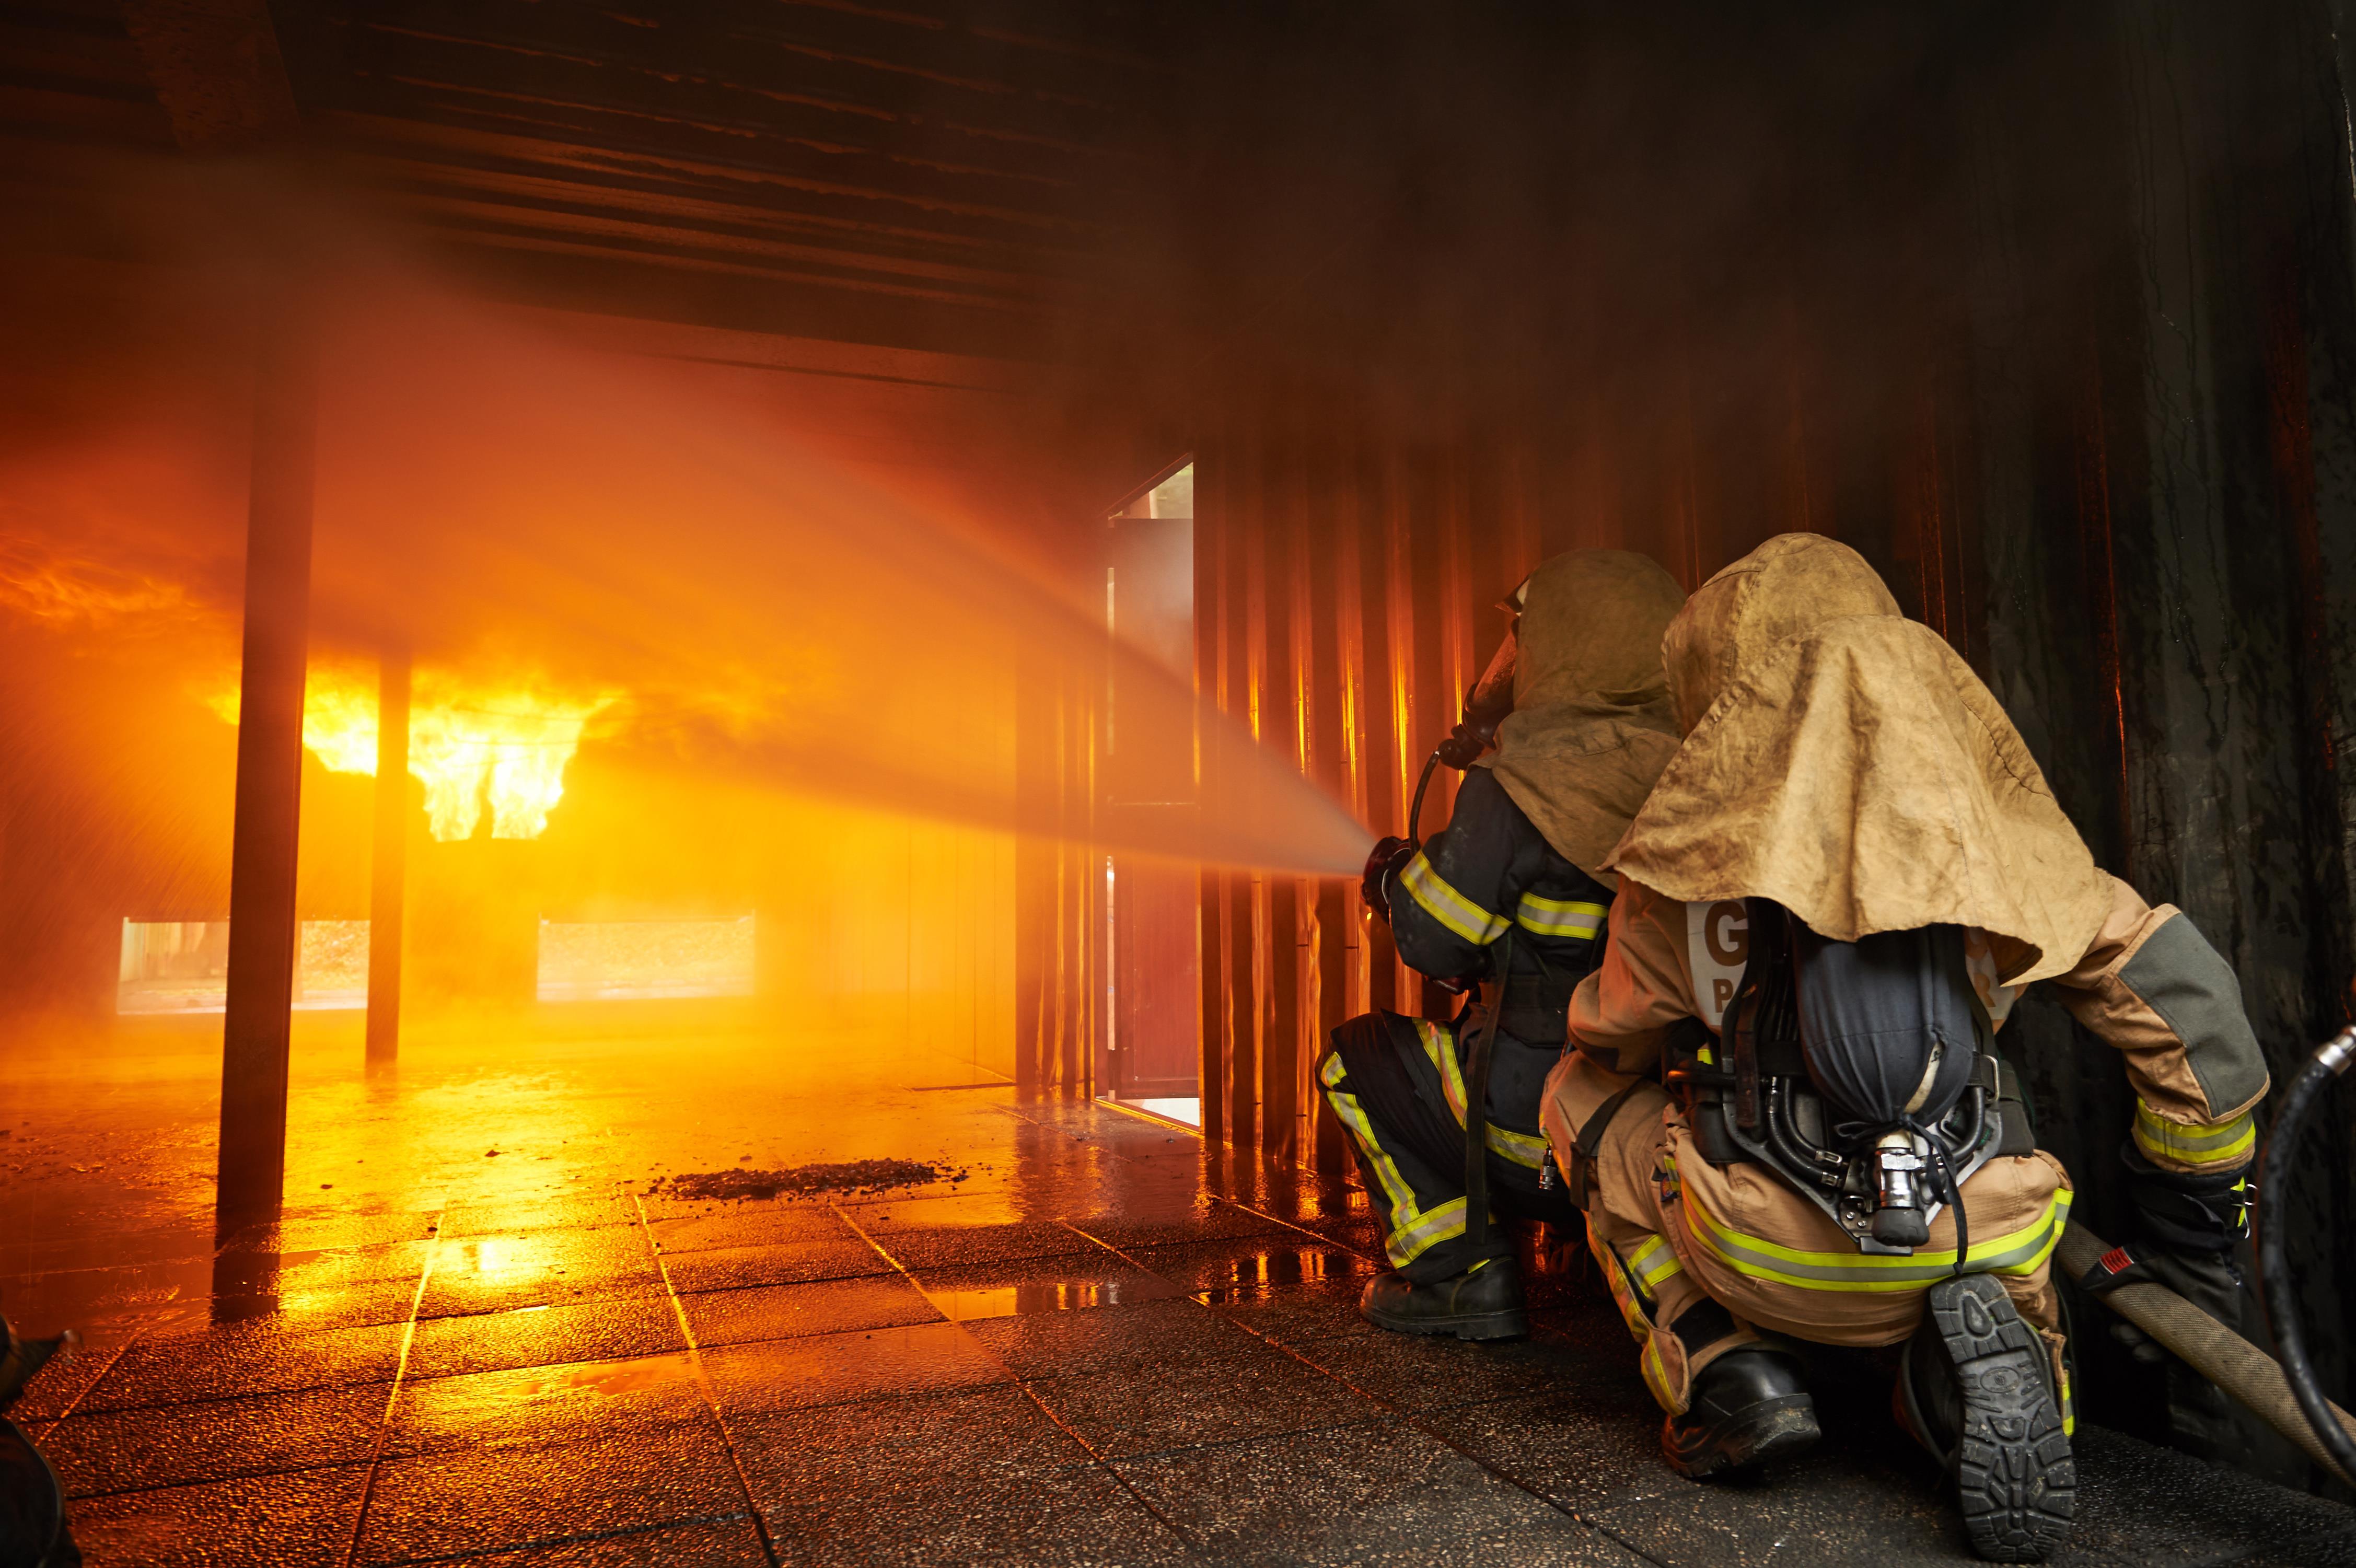 Advanced Structural Firefighting